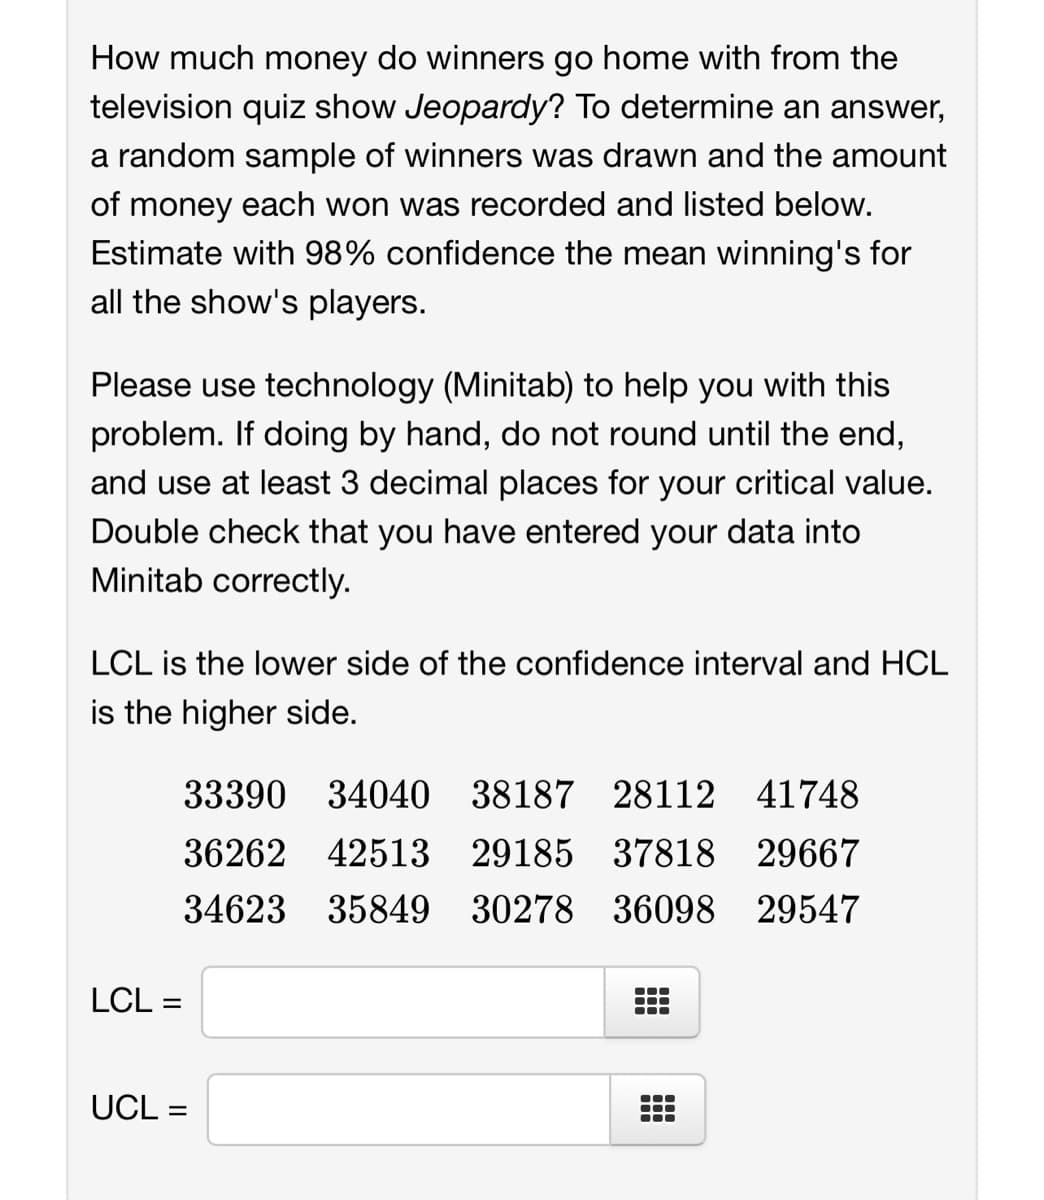 How much money do winners go home with from the
television quiz show Jeopardy? To determine an answer,
a random sample of winners was drawn and the amount
of money each won was recorded and listed below.
Estimate with 98% confidence the mean winning's for
all the show's players.
Please use technology (Minitab) to help you with this
problem. If doing by hand, do not round until the end,
and use at least 3 decimal places for your critical value.
Double check that you have entered your data into
Minitab correctly.
LCL is the lower side of the confidence interval and HCL
is the higher side.
LCL =
33390 34040 38187 28112 41748
36262 42513 29185 37818
29667
34623
35849
30278
36098
29547
UCL =
●●●
●●●
●●●
●●●